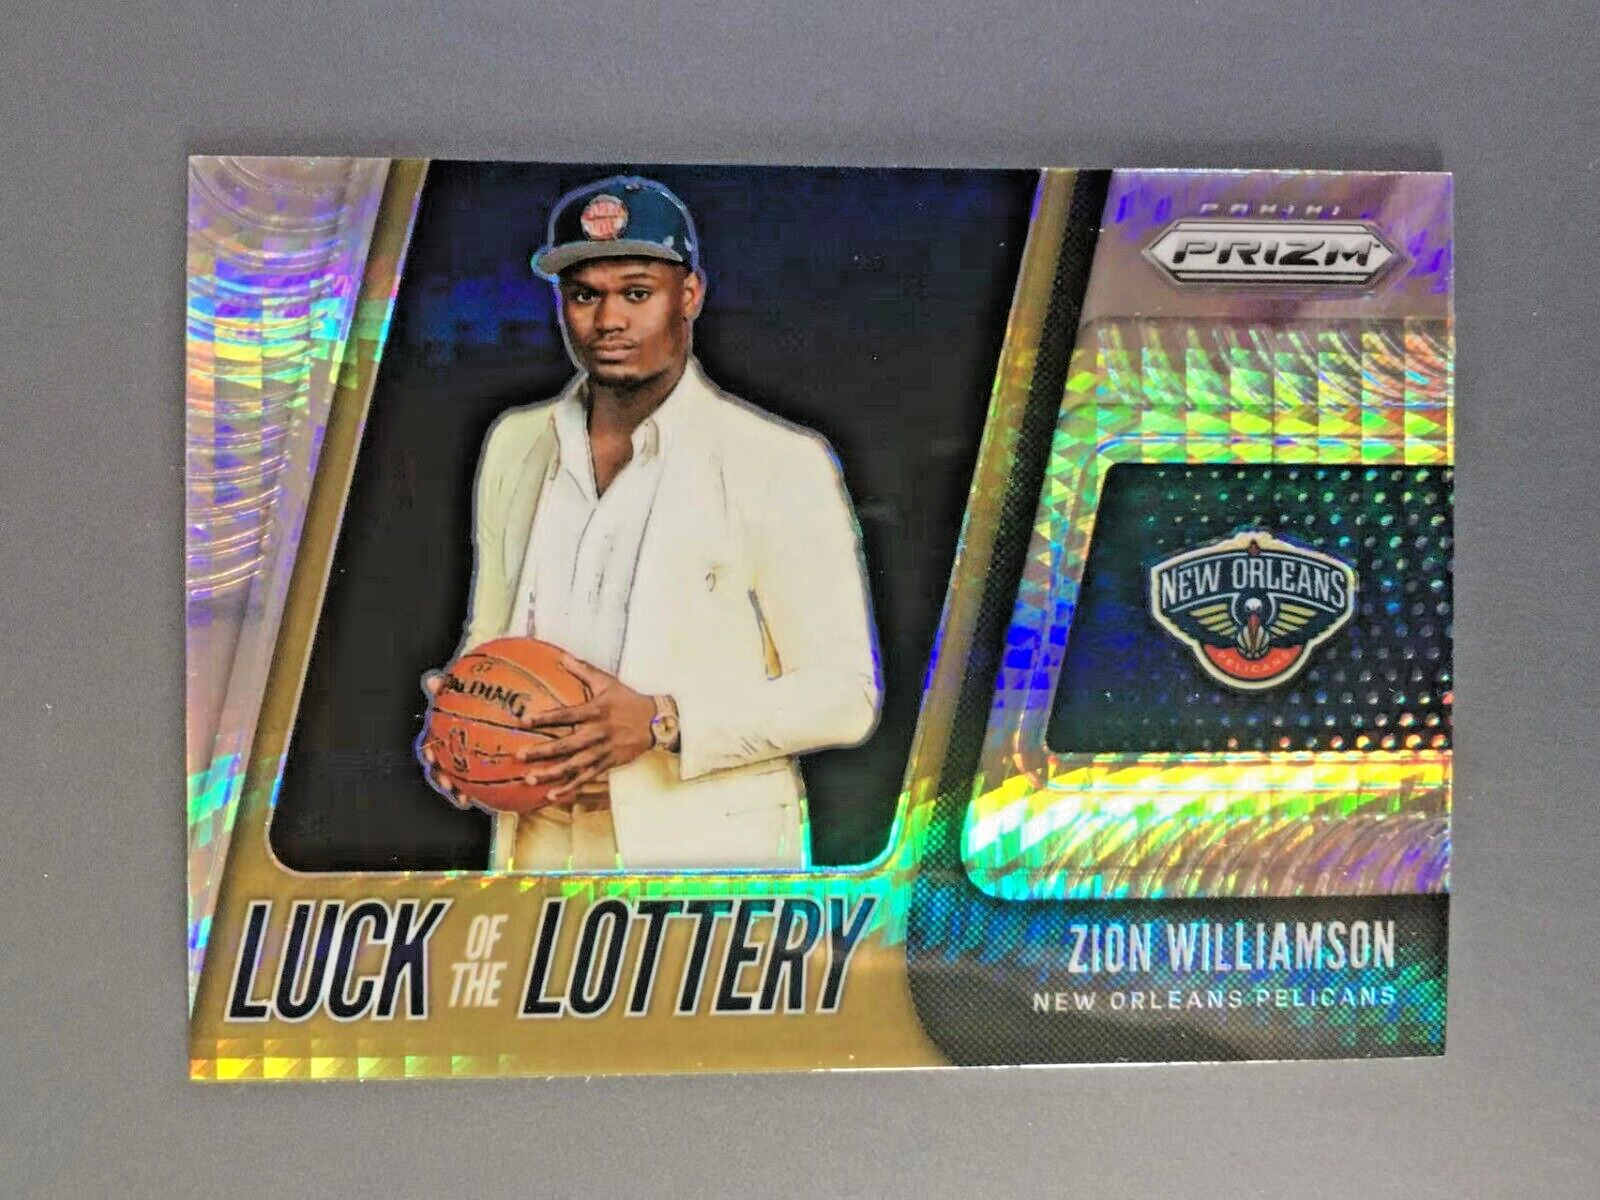 Zion Williamson 2019-20 Panini Prizm Luck of the Lottery Hyper Prizm RC #1